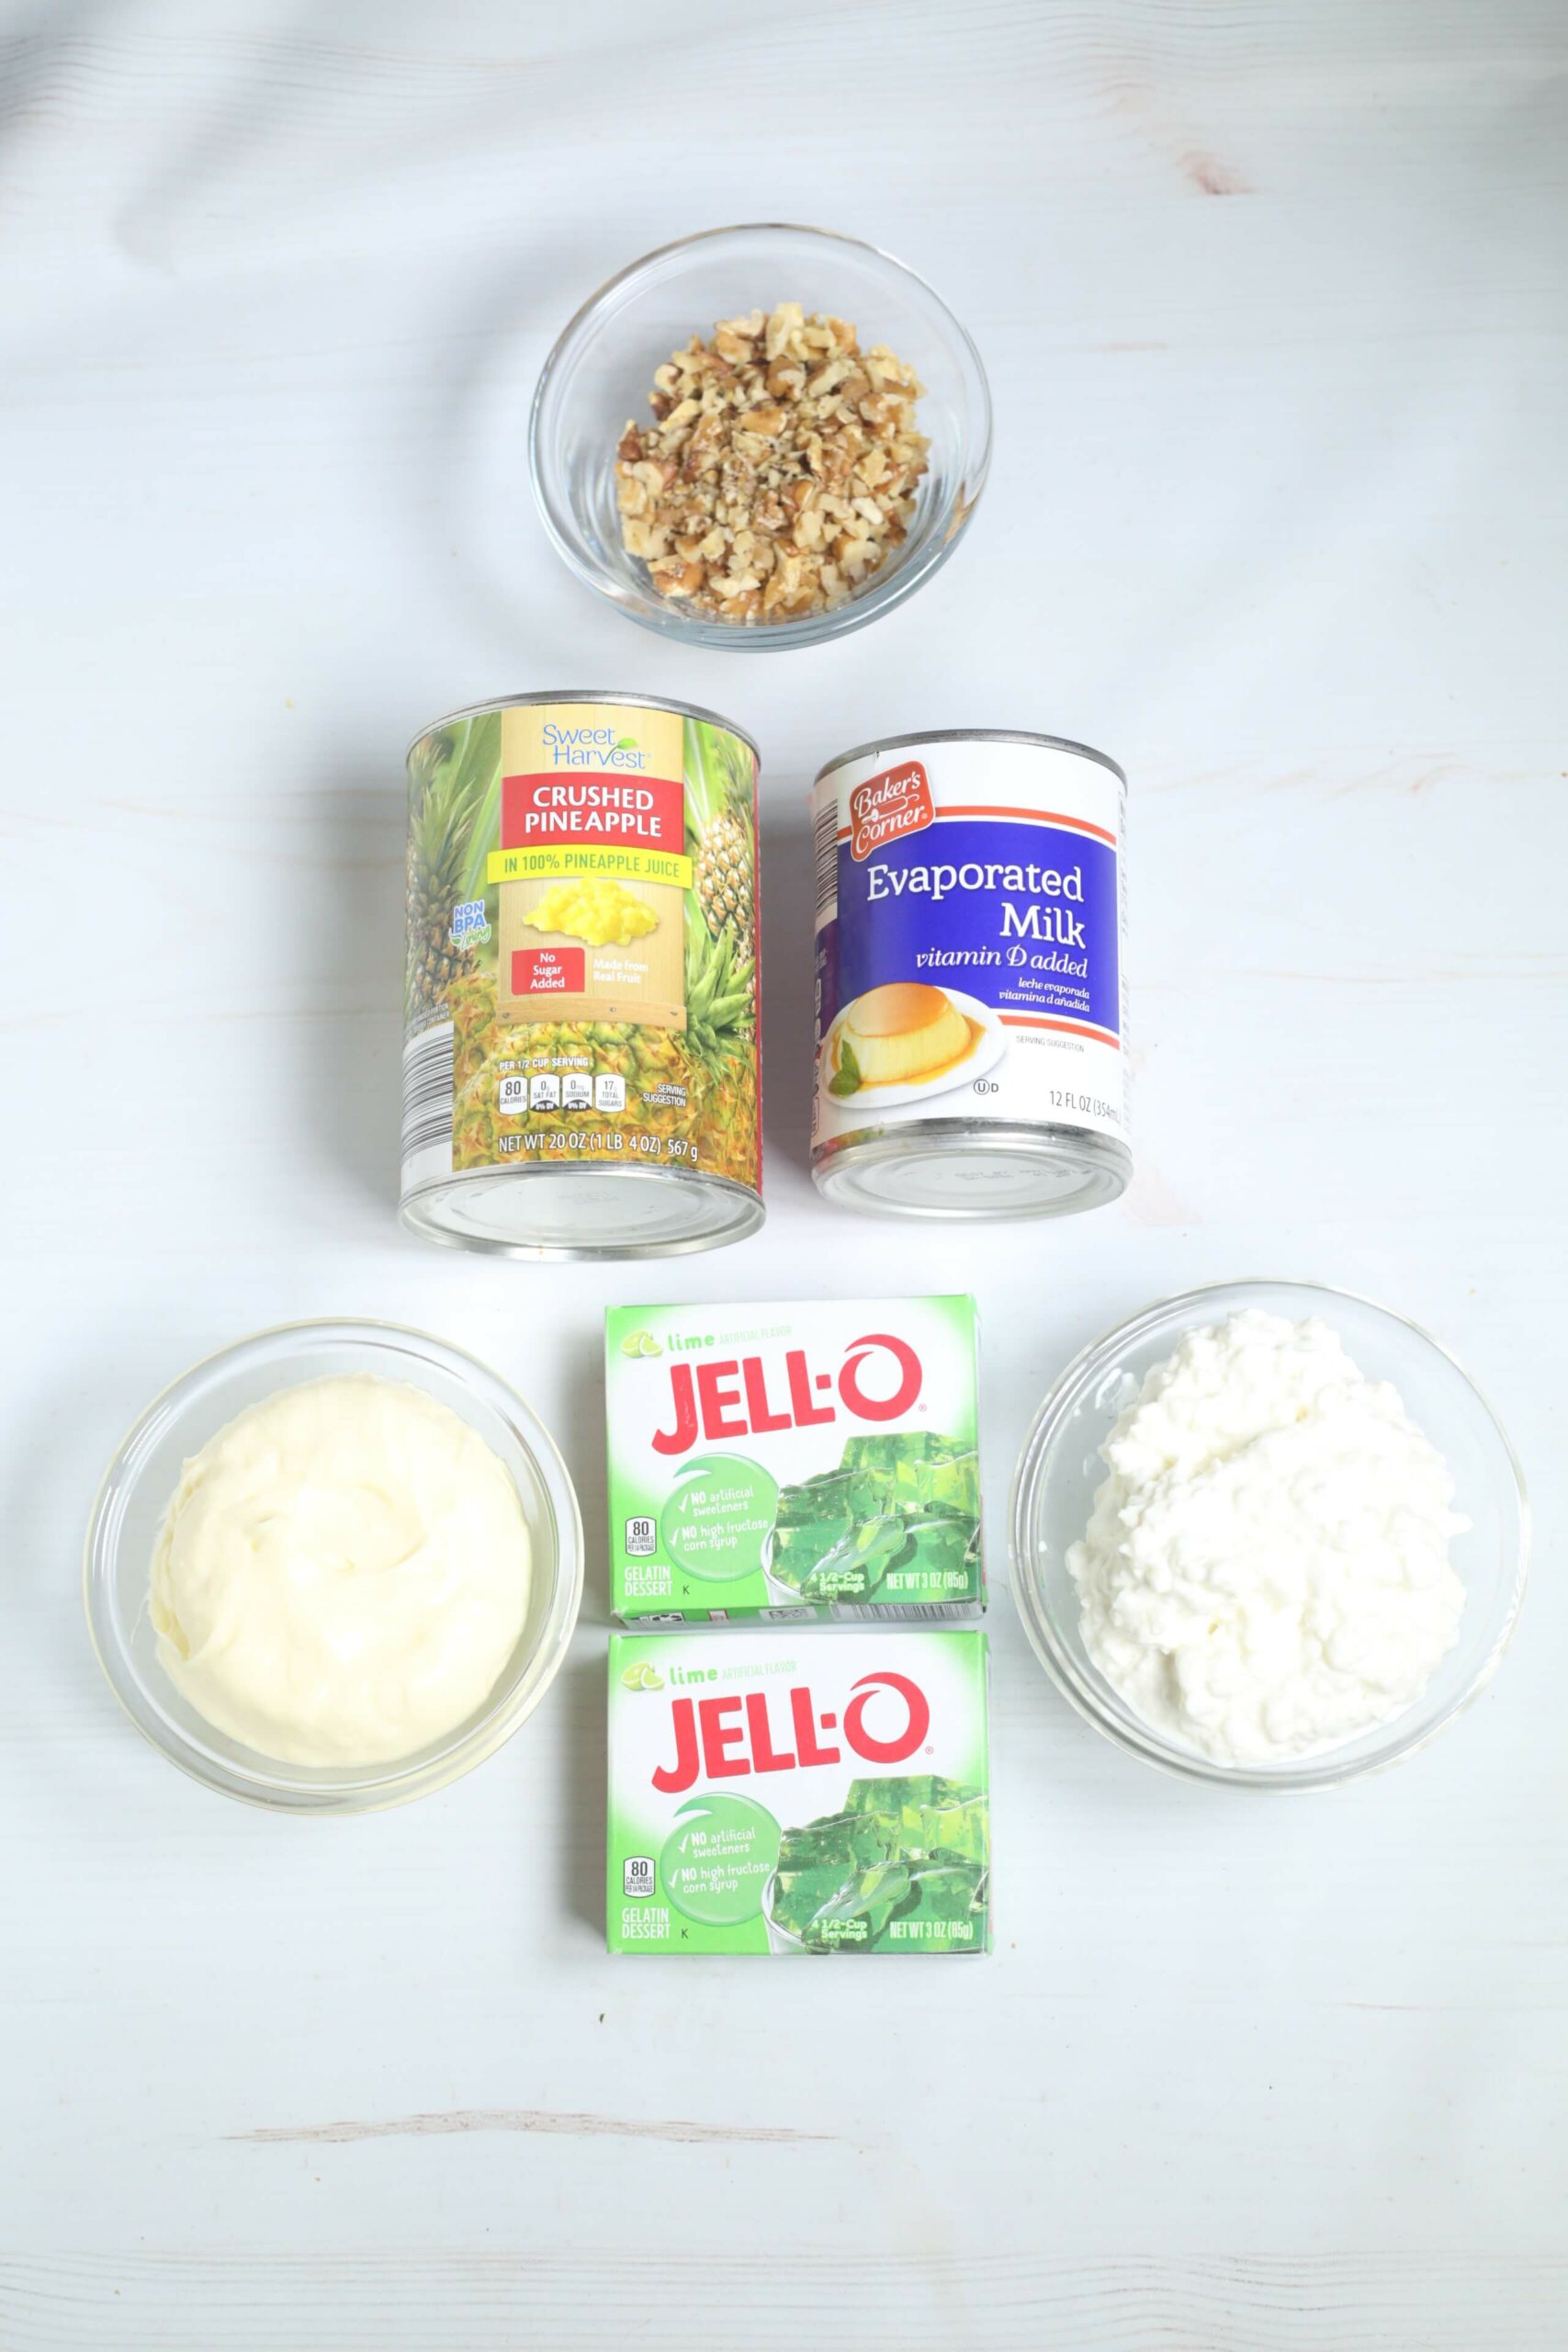 Lime Jello, nuts and cream mixture for the salad.